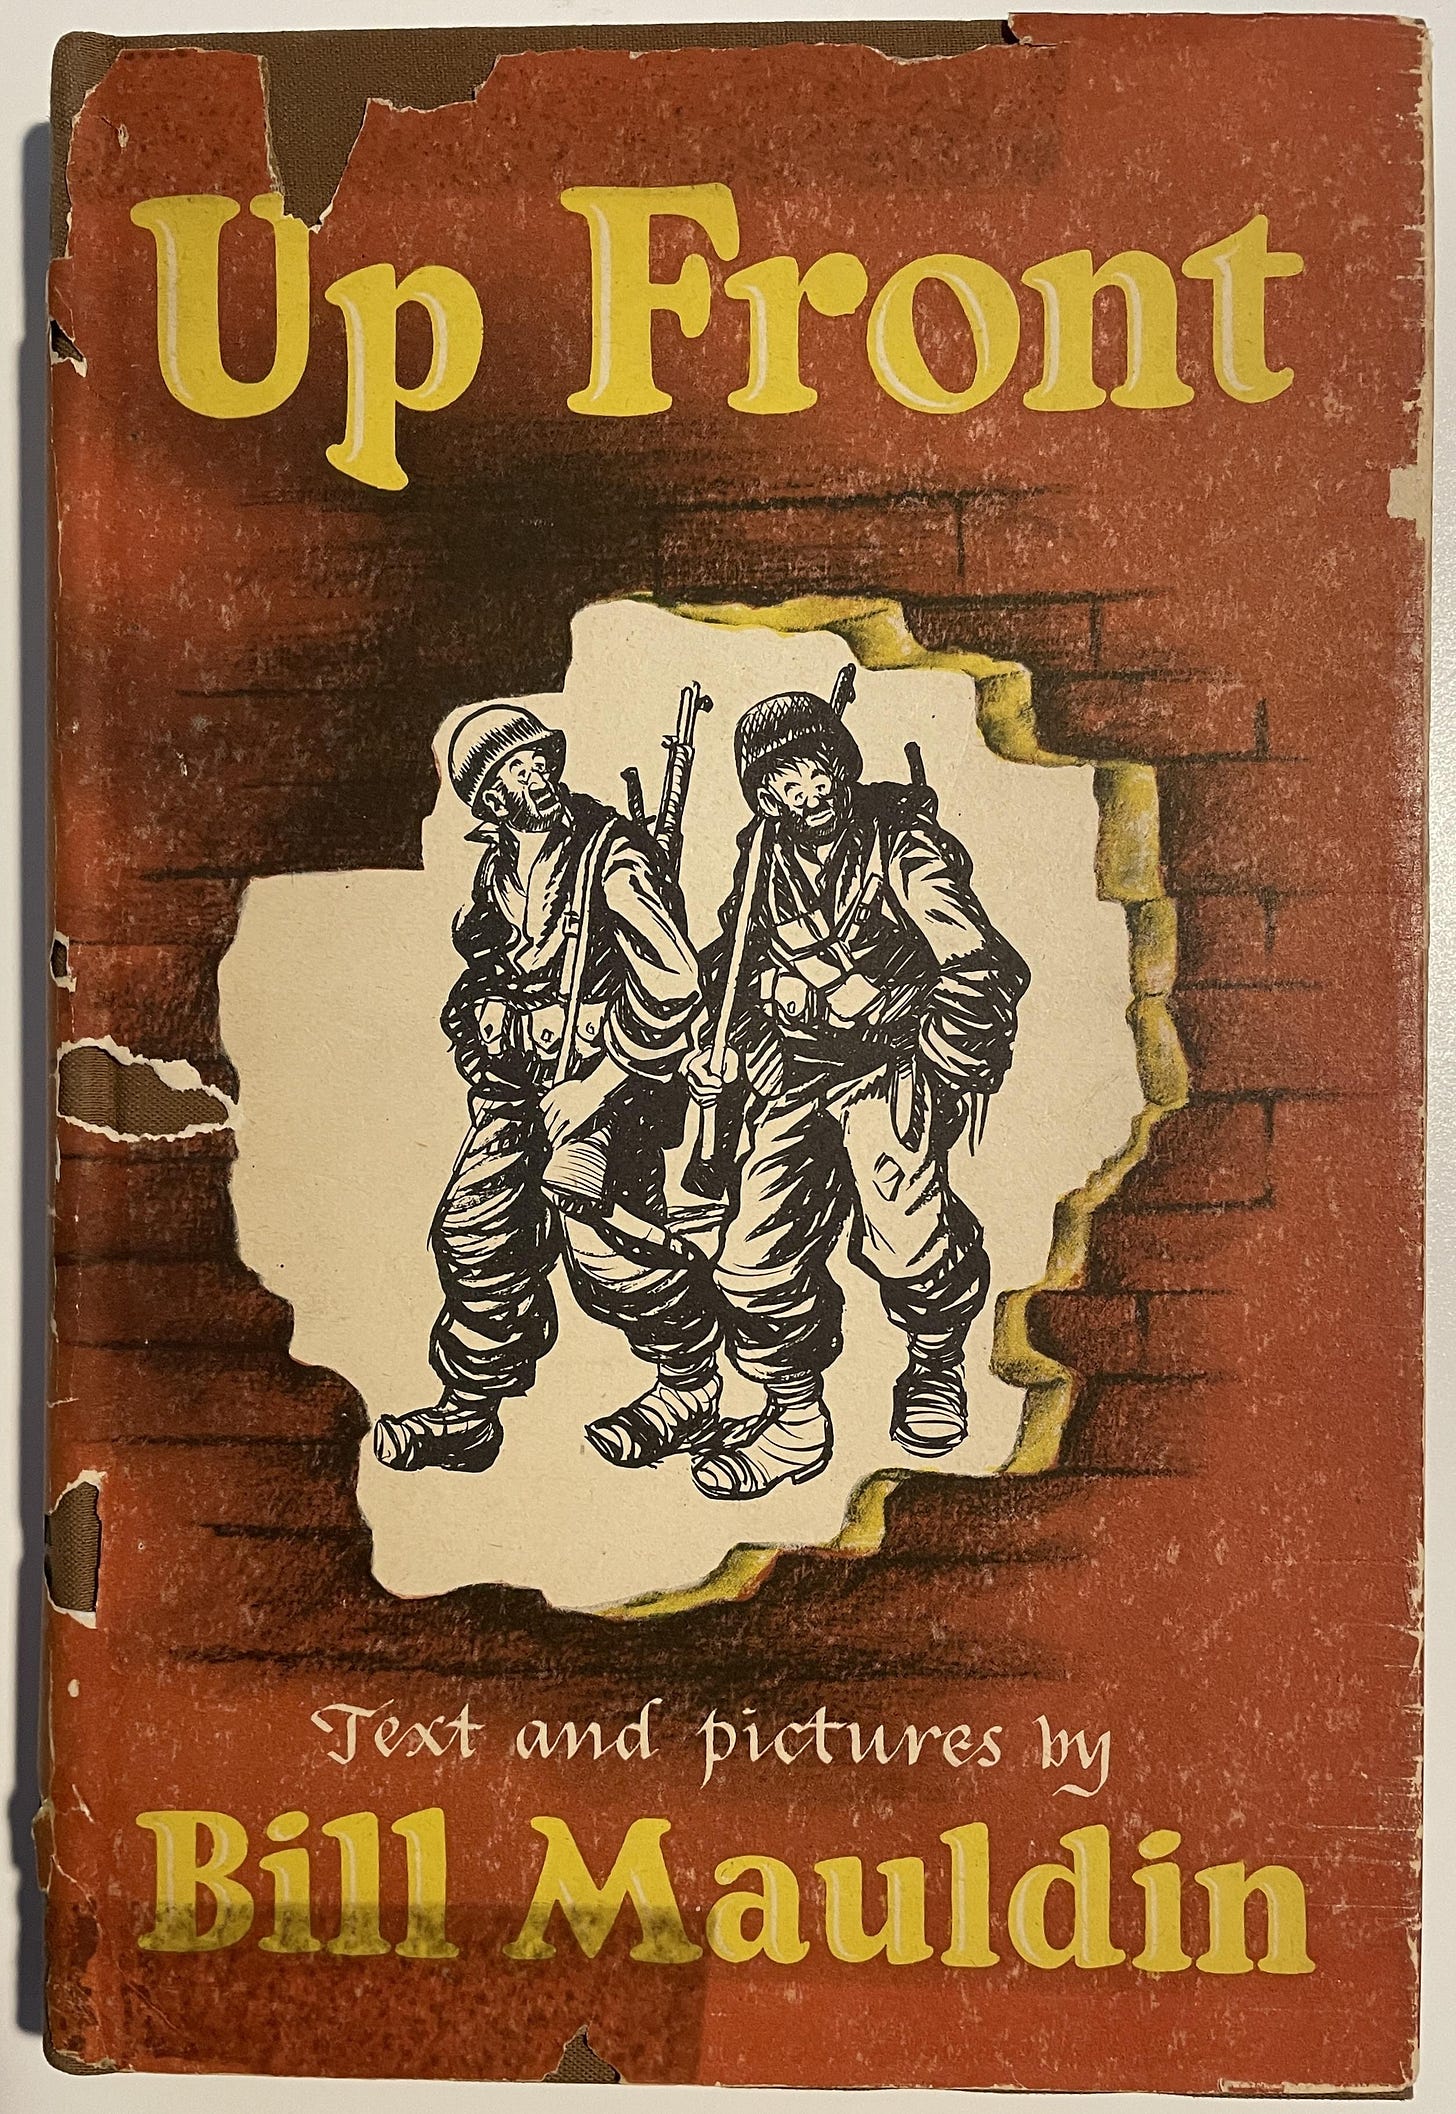 "Up Front" by Bill Mauldin